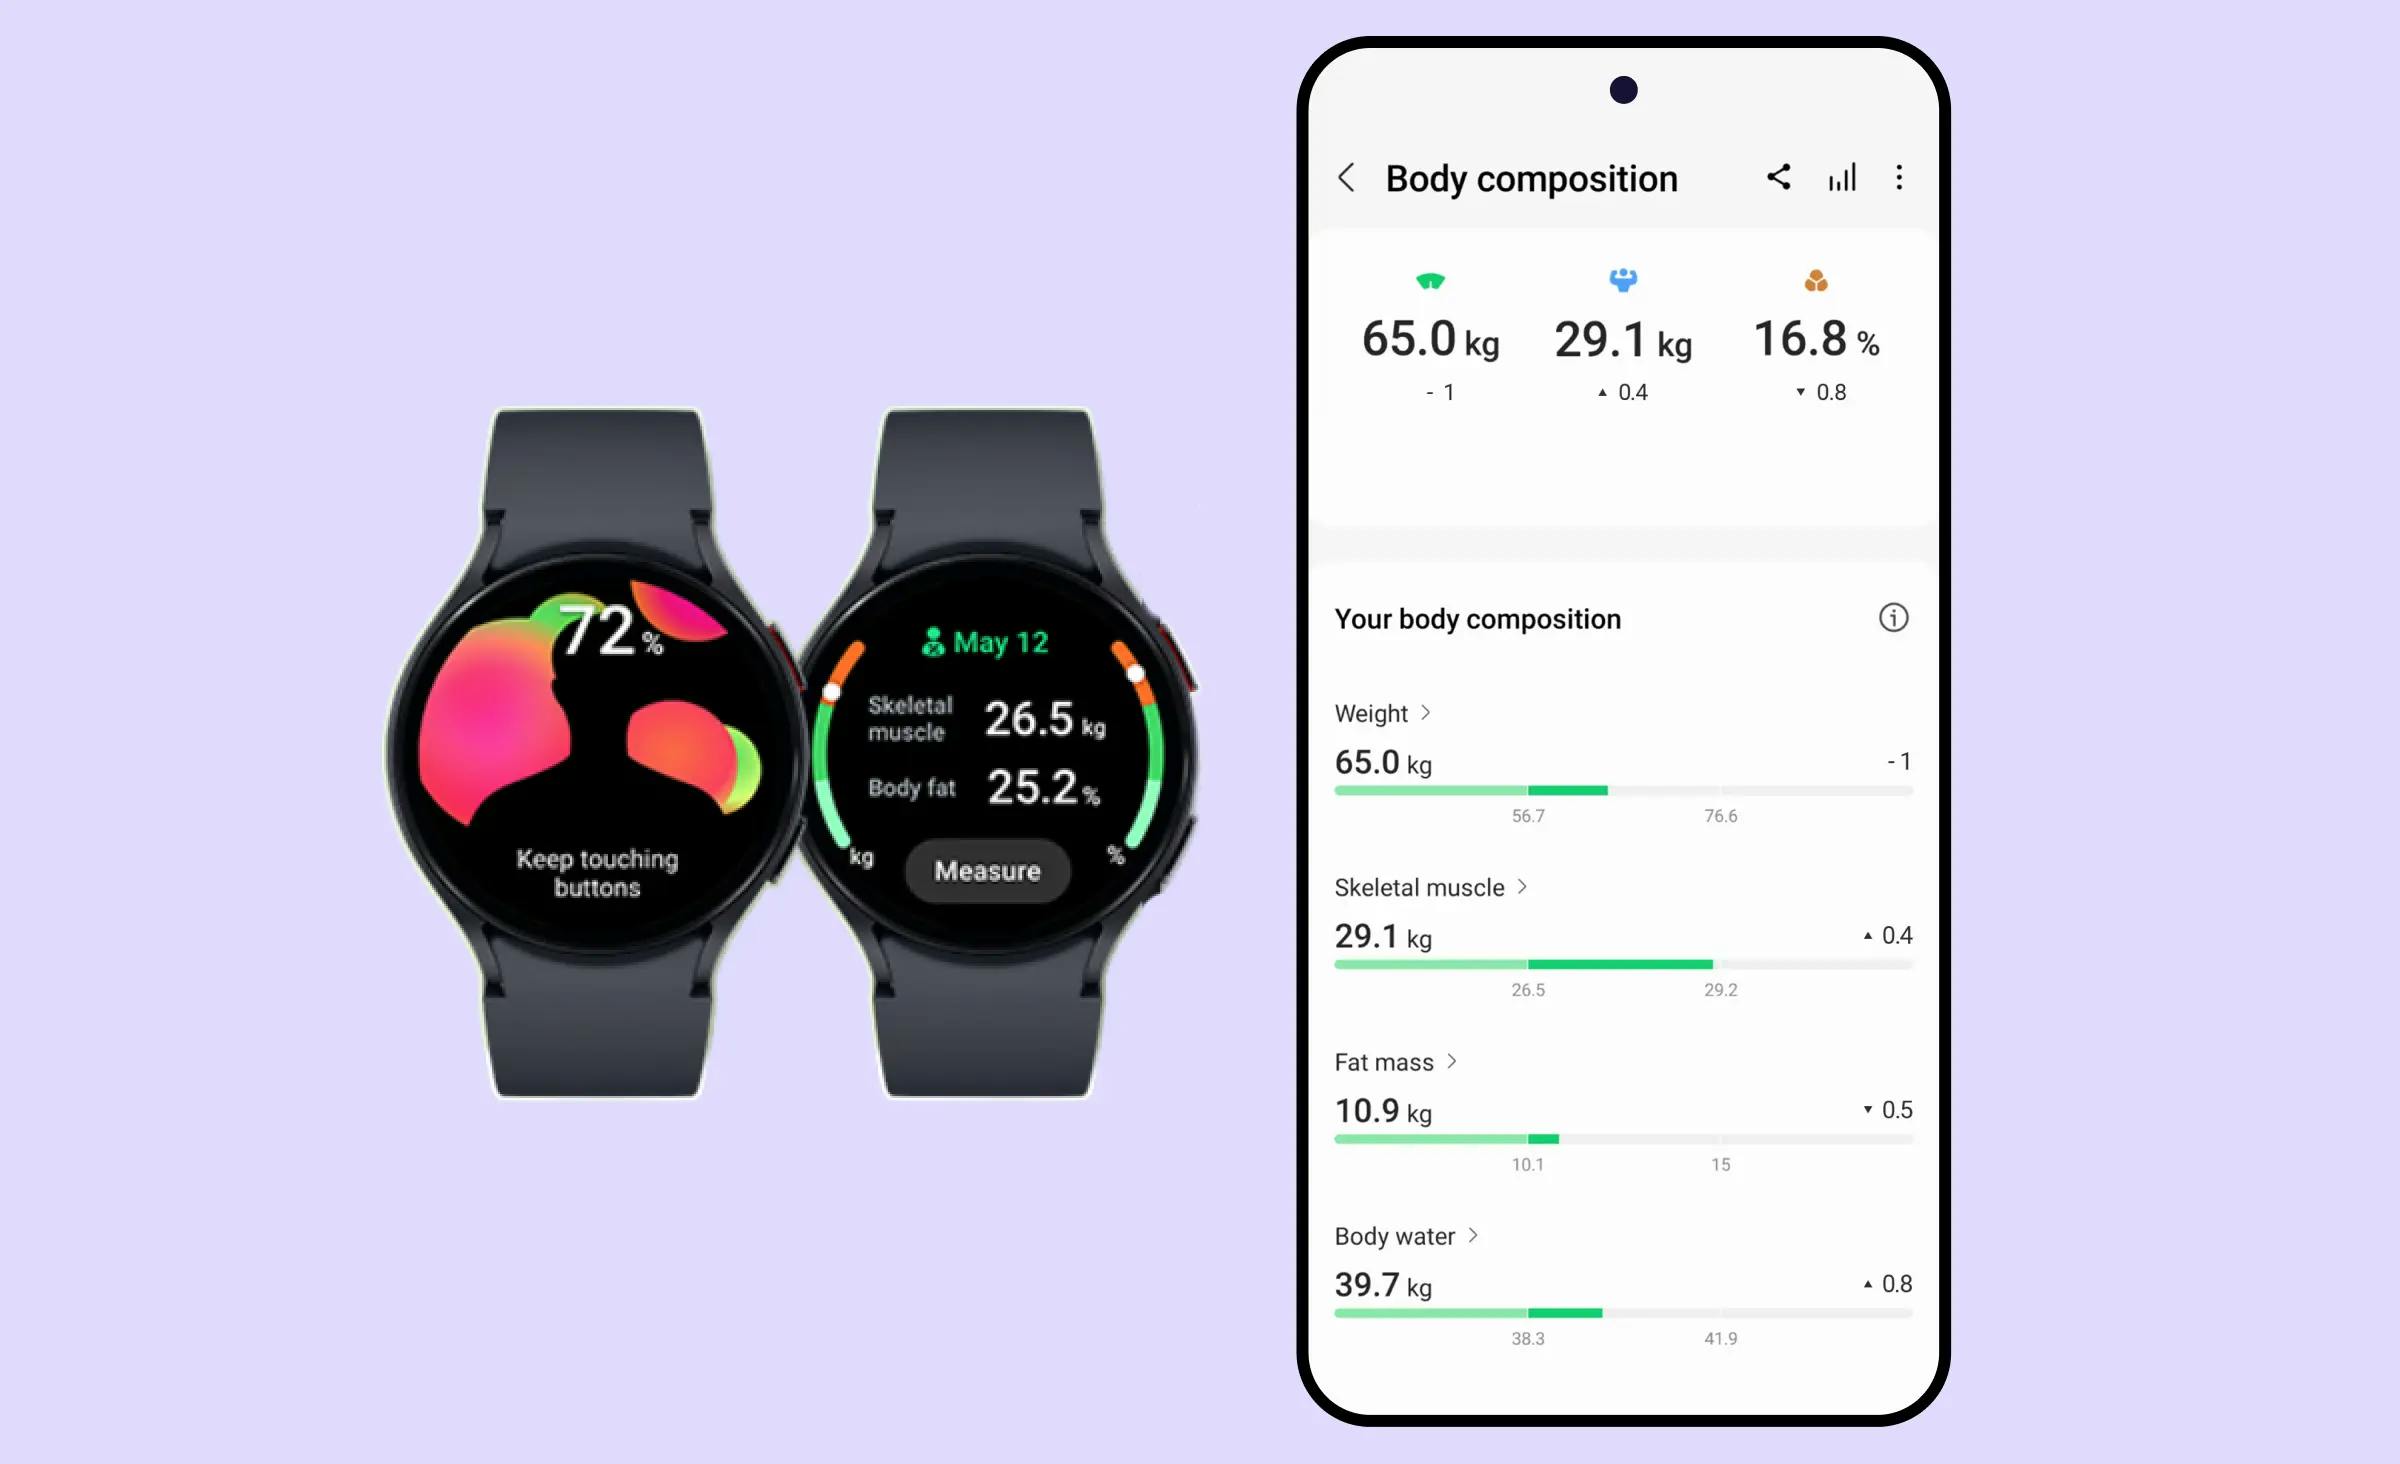 Samsung Health, a fitness app that connects to smartwatches